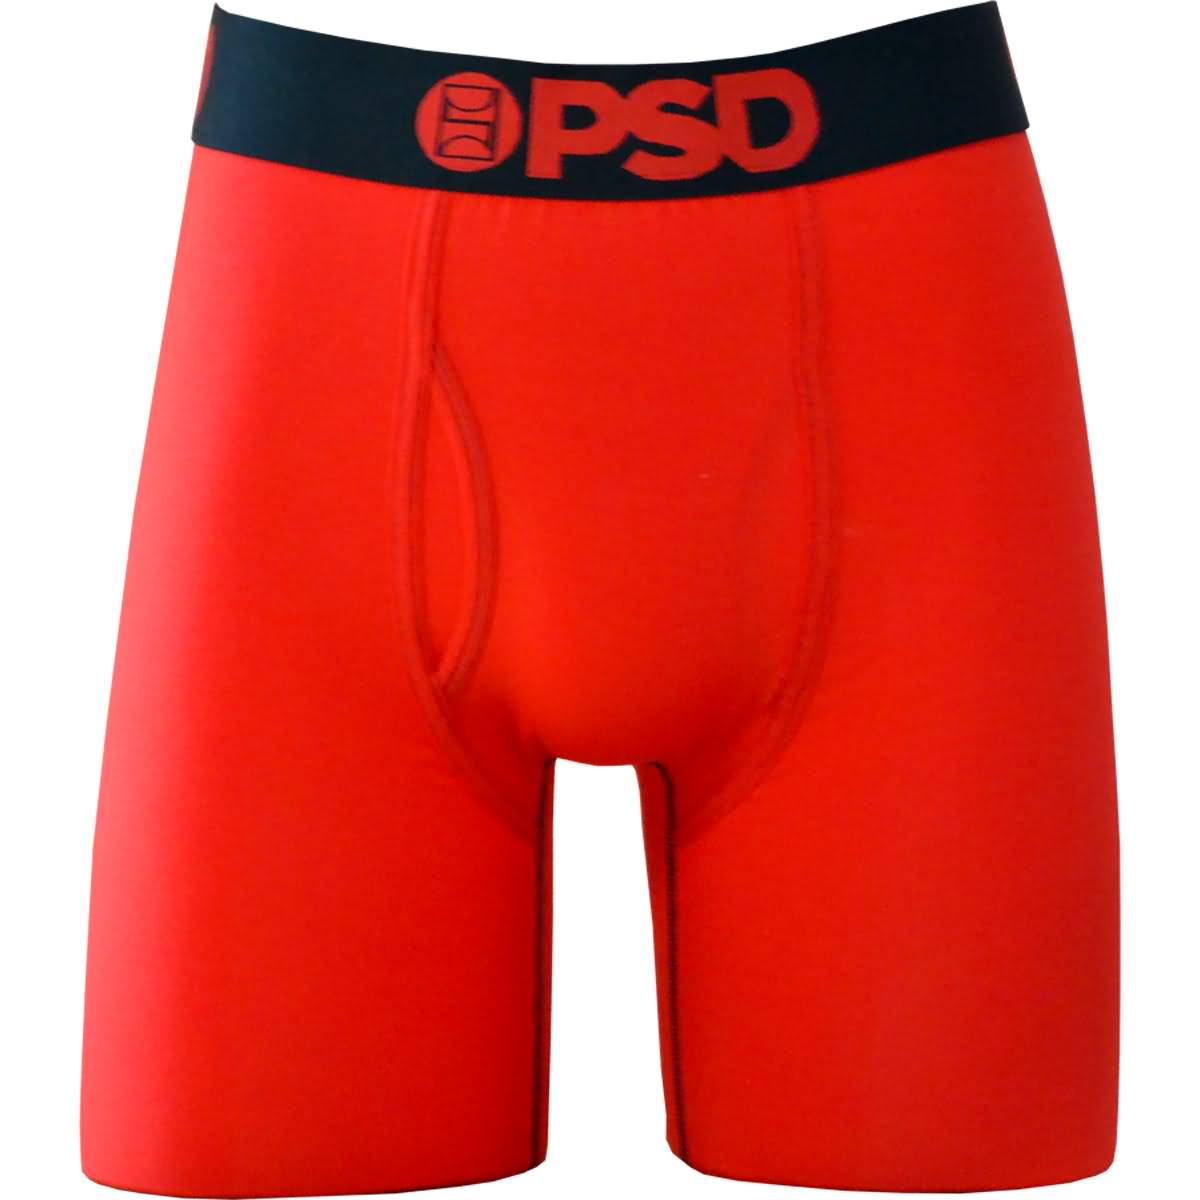 PSD Modal Red With Black Waistband Boxer Men's Bottom Underwear - Red /  X-Large